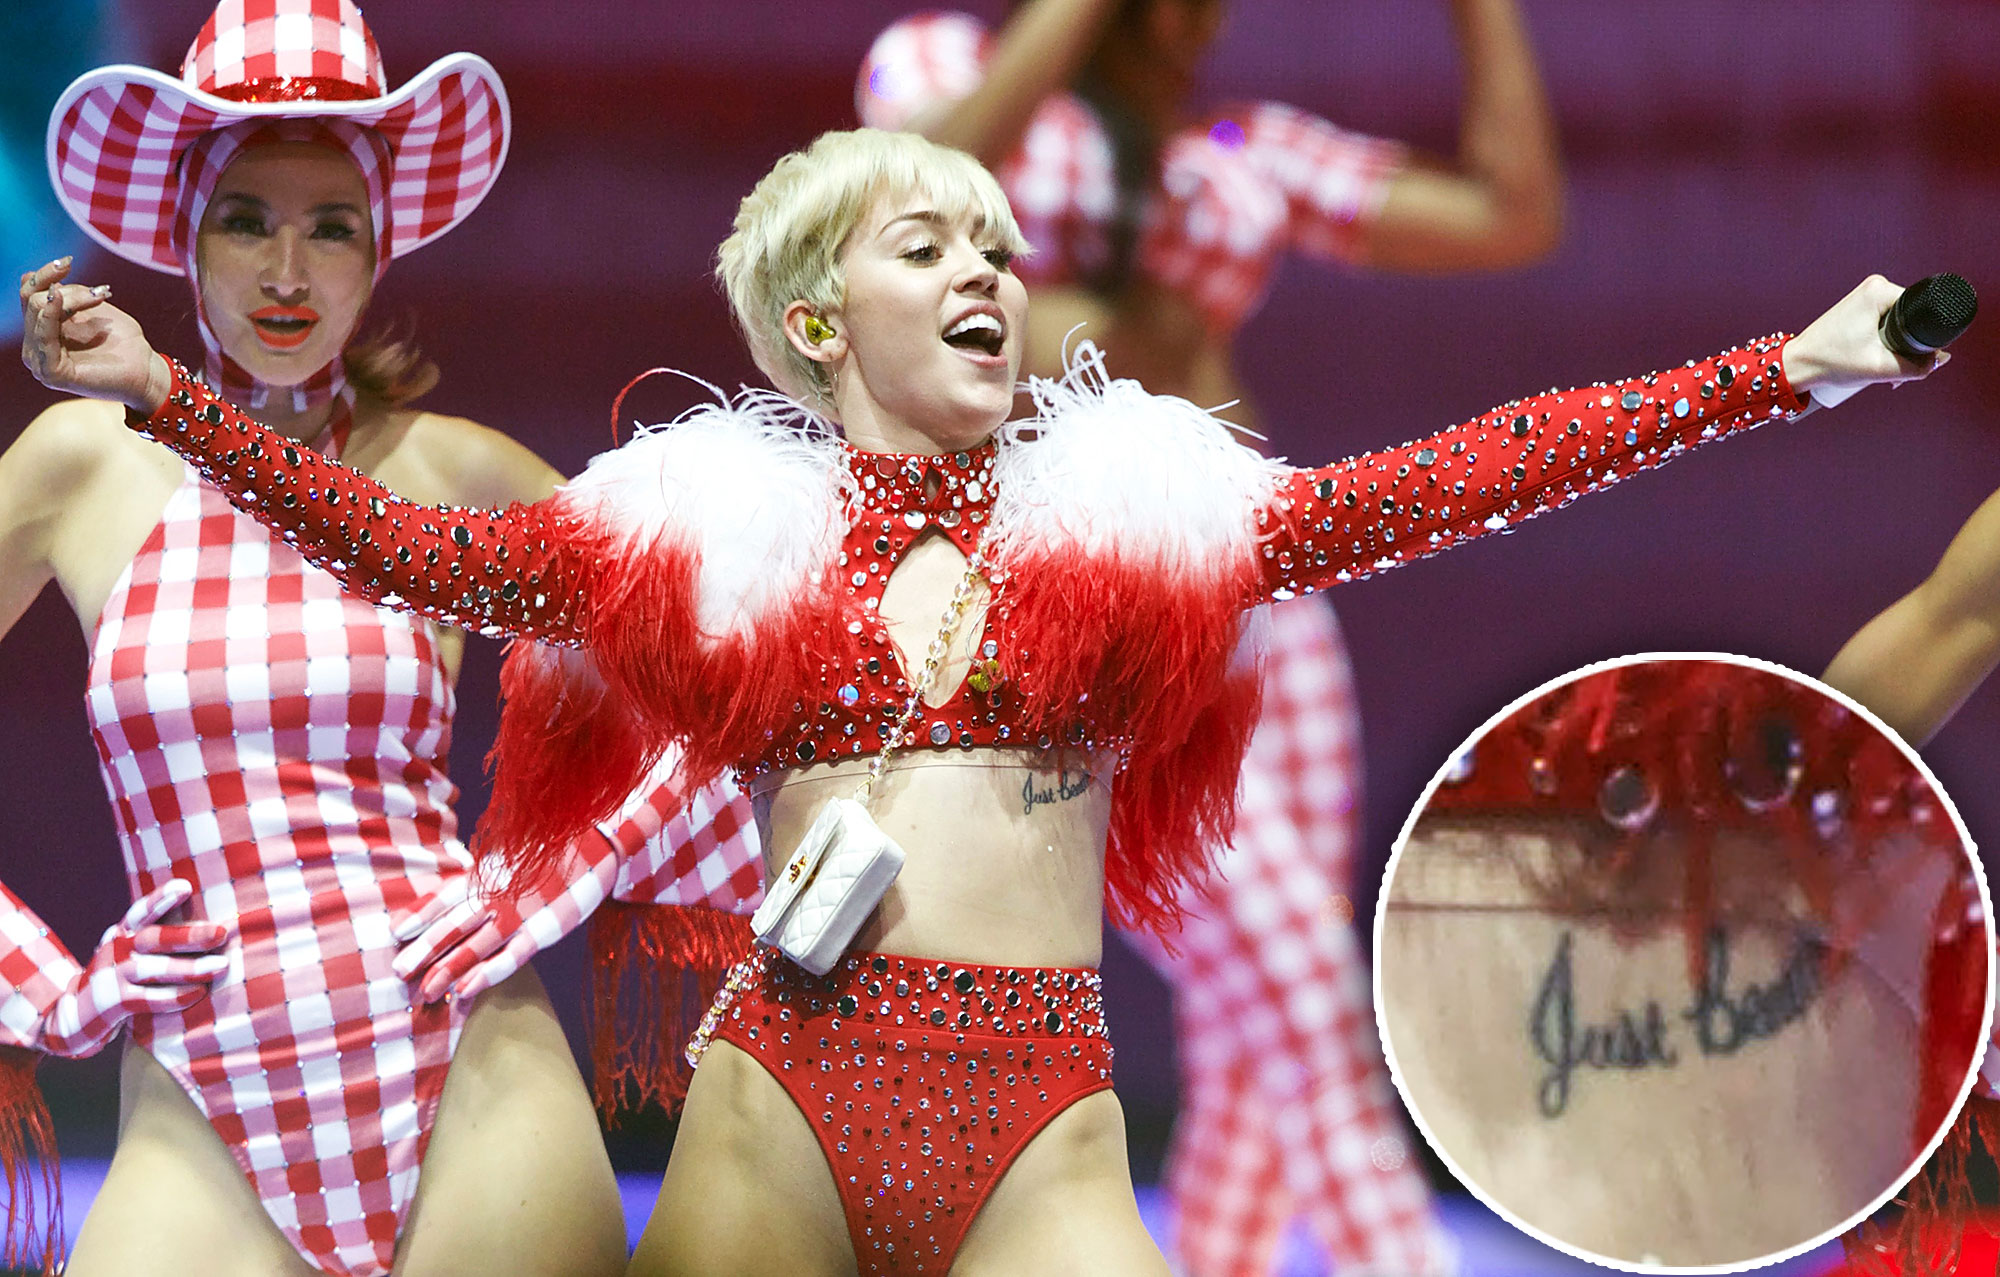 Miley Cyrus Tattoos Guide To All Her Ink And Their Meanings 9027